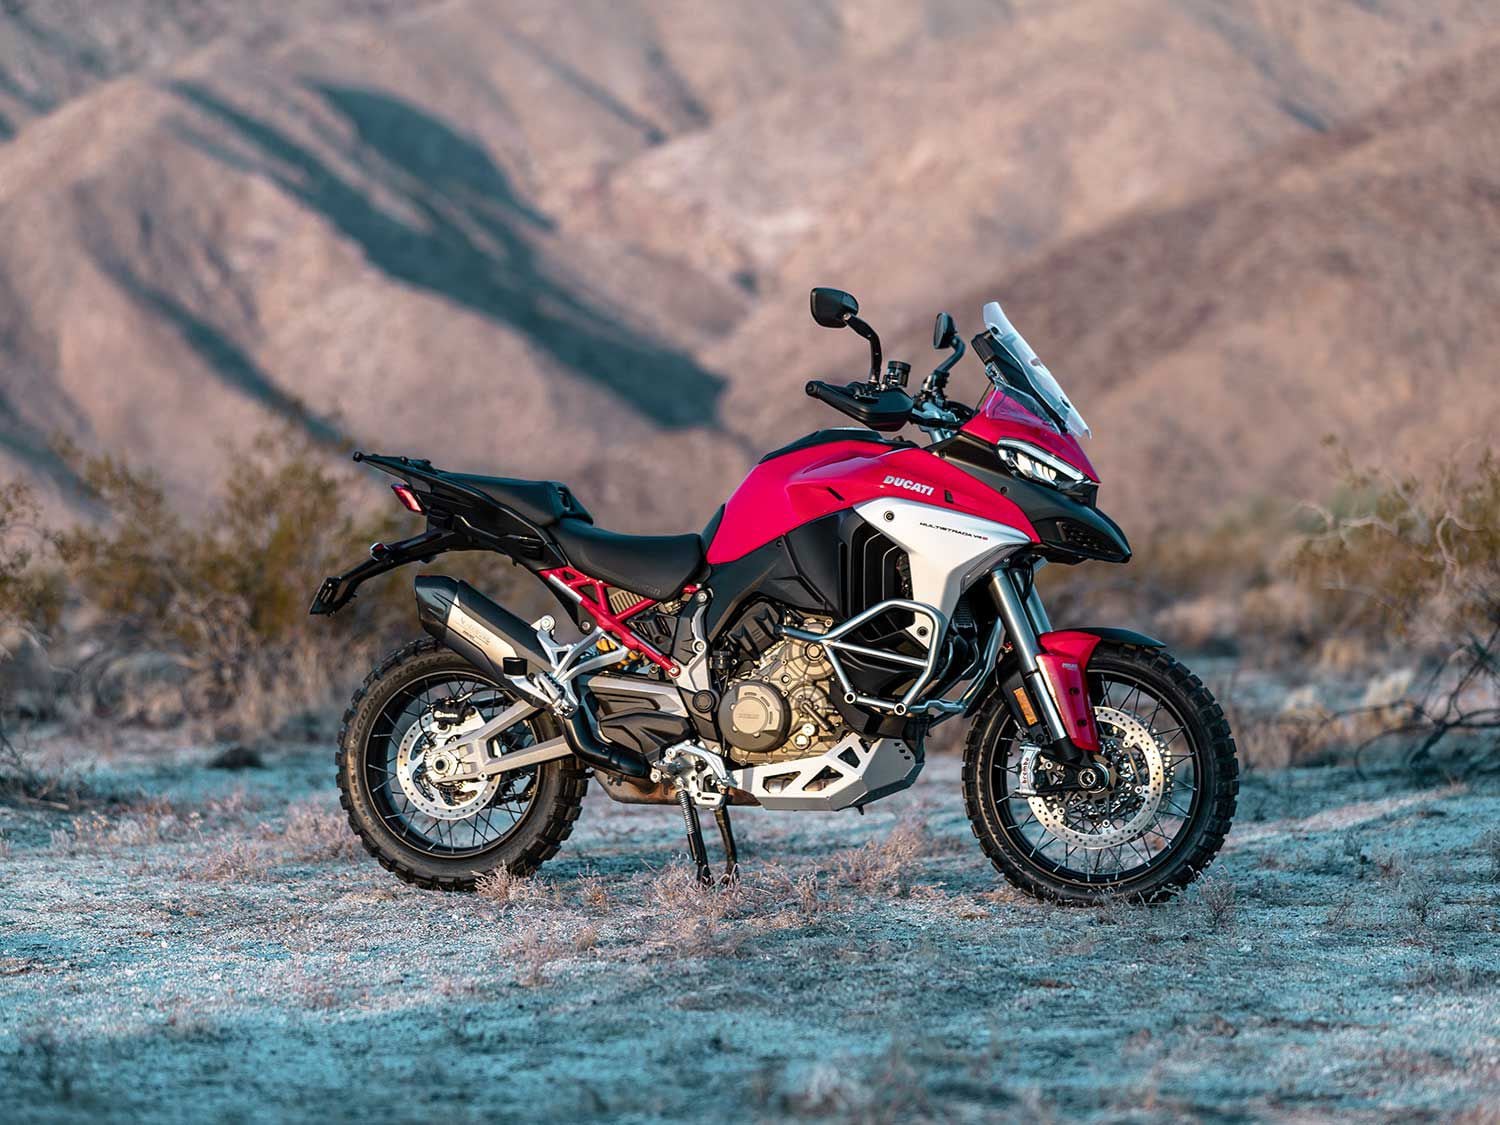 The 2021 Multistrada V4 S can be outfitted in traditional or spoked aluminum wheels ($200 upcharge).